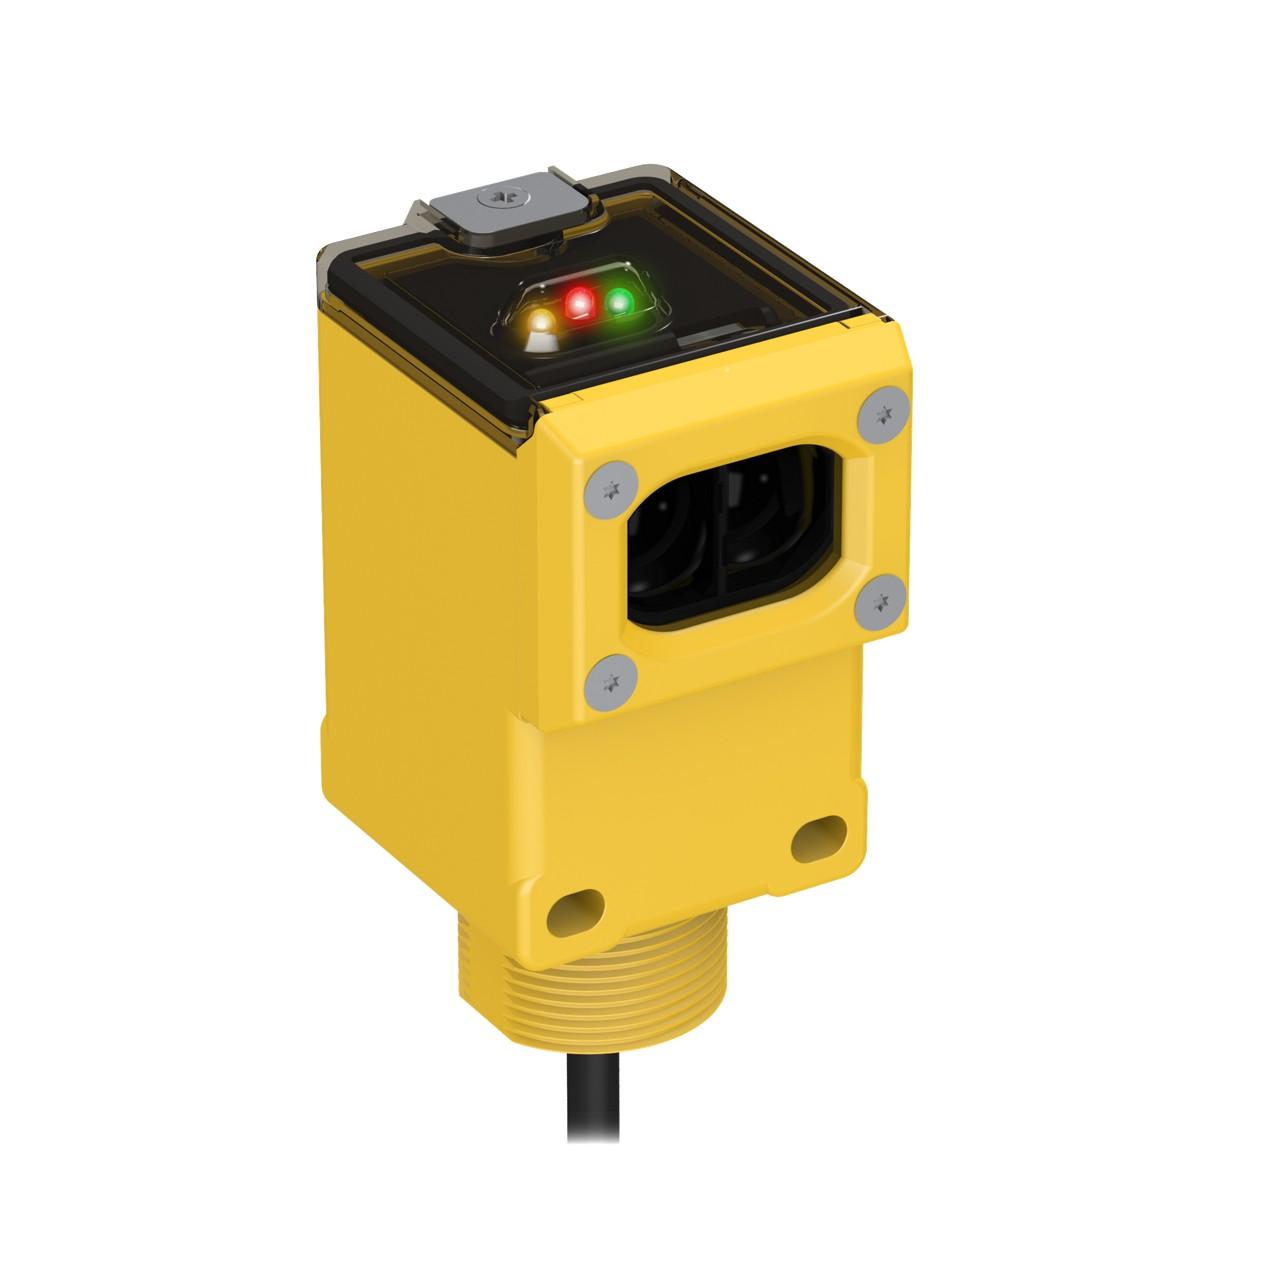 Banner Q45VR3R Photo-electric sensor receiver with through-beam system / opposed mode - Banner Engineering (Q series - Q45VR3) - Part #53982 - Sensing range 60m - Infrared (IR) light (880nm) - 1 x digital output (SPDT contact type) (Light-ON or Dark-ON operation) - Supp